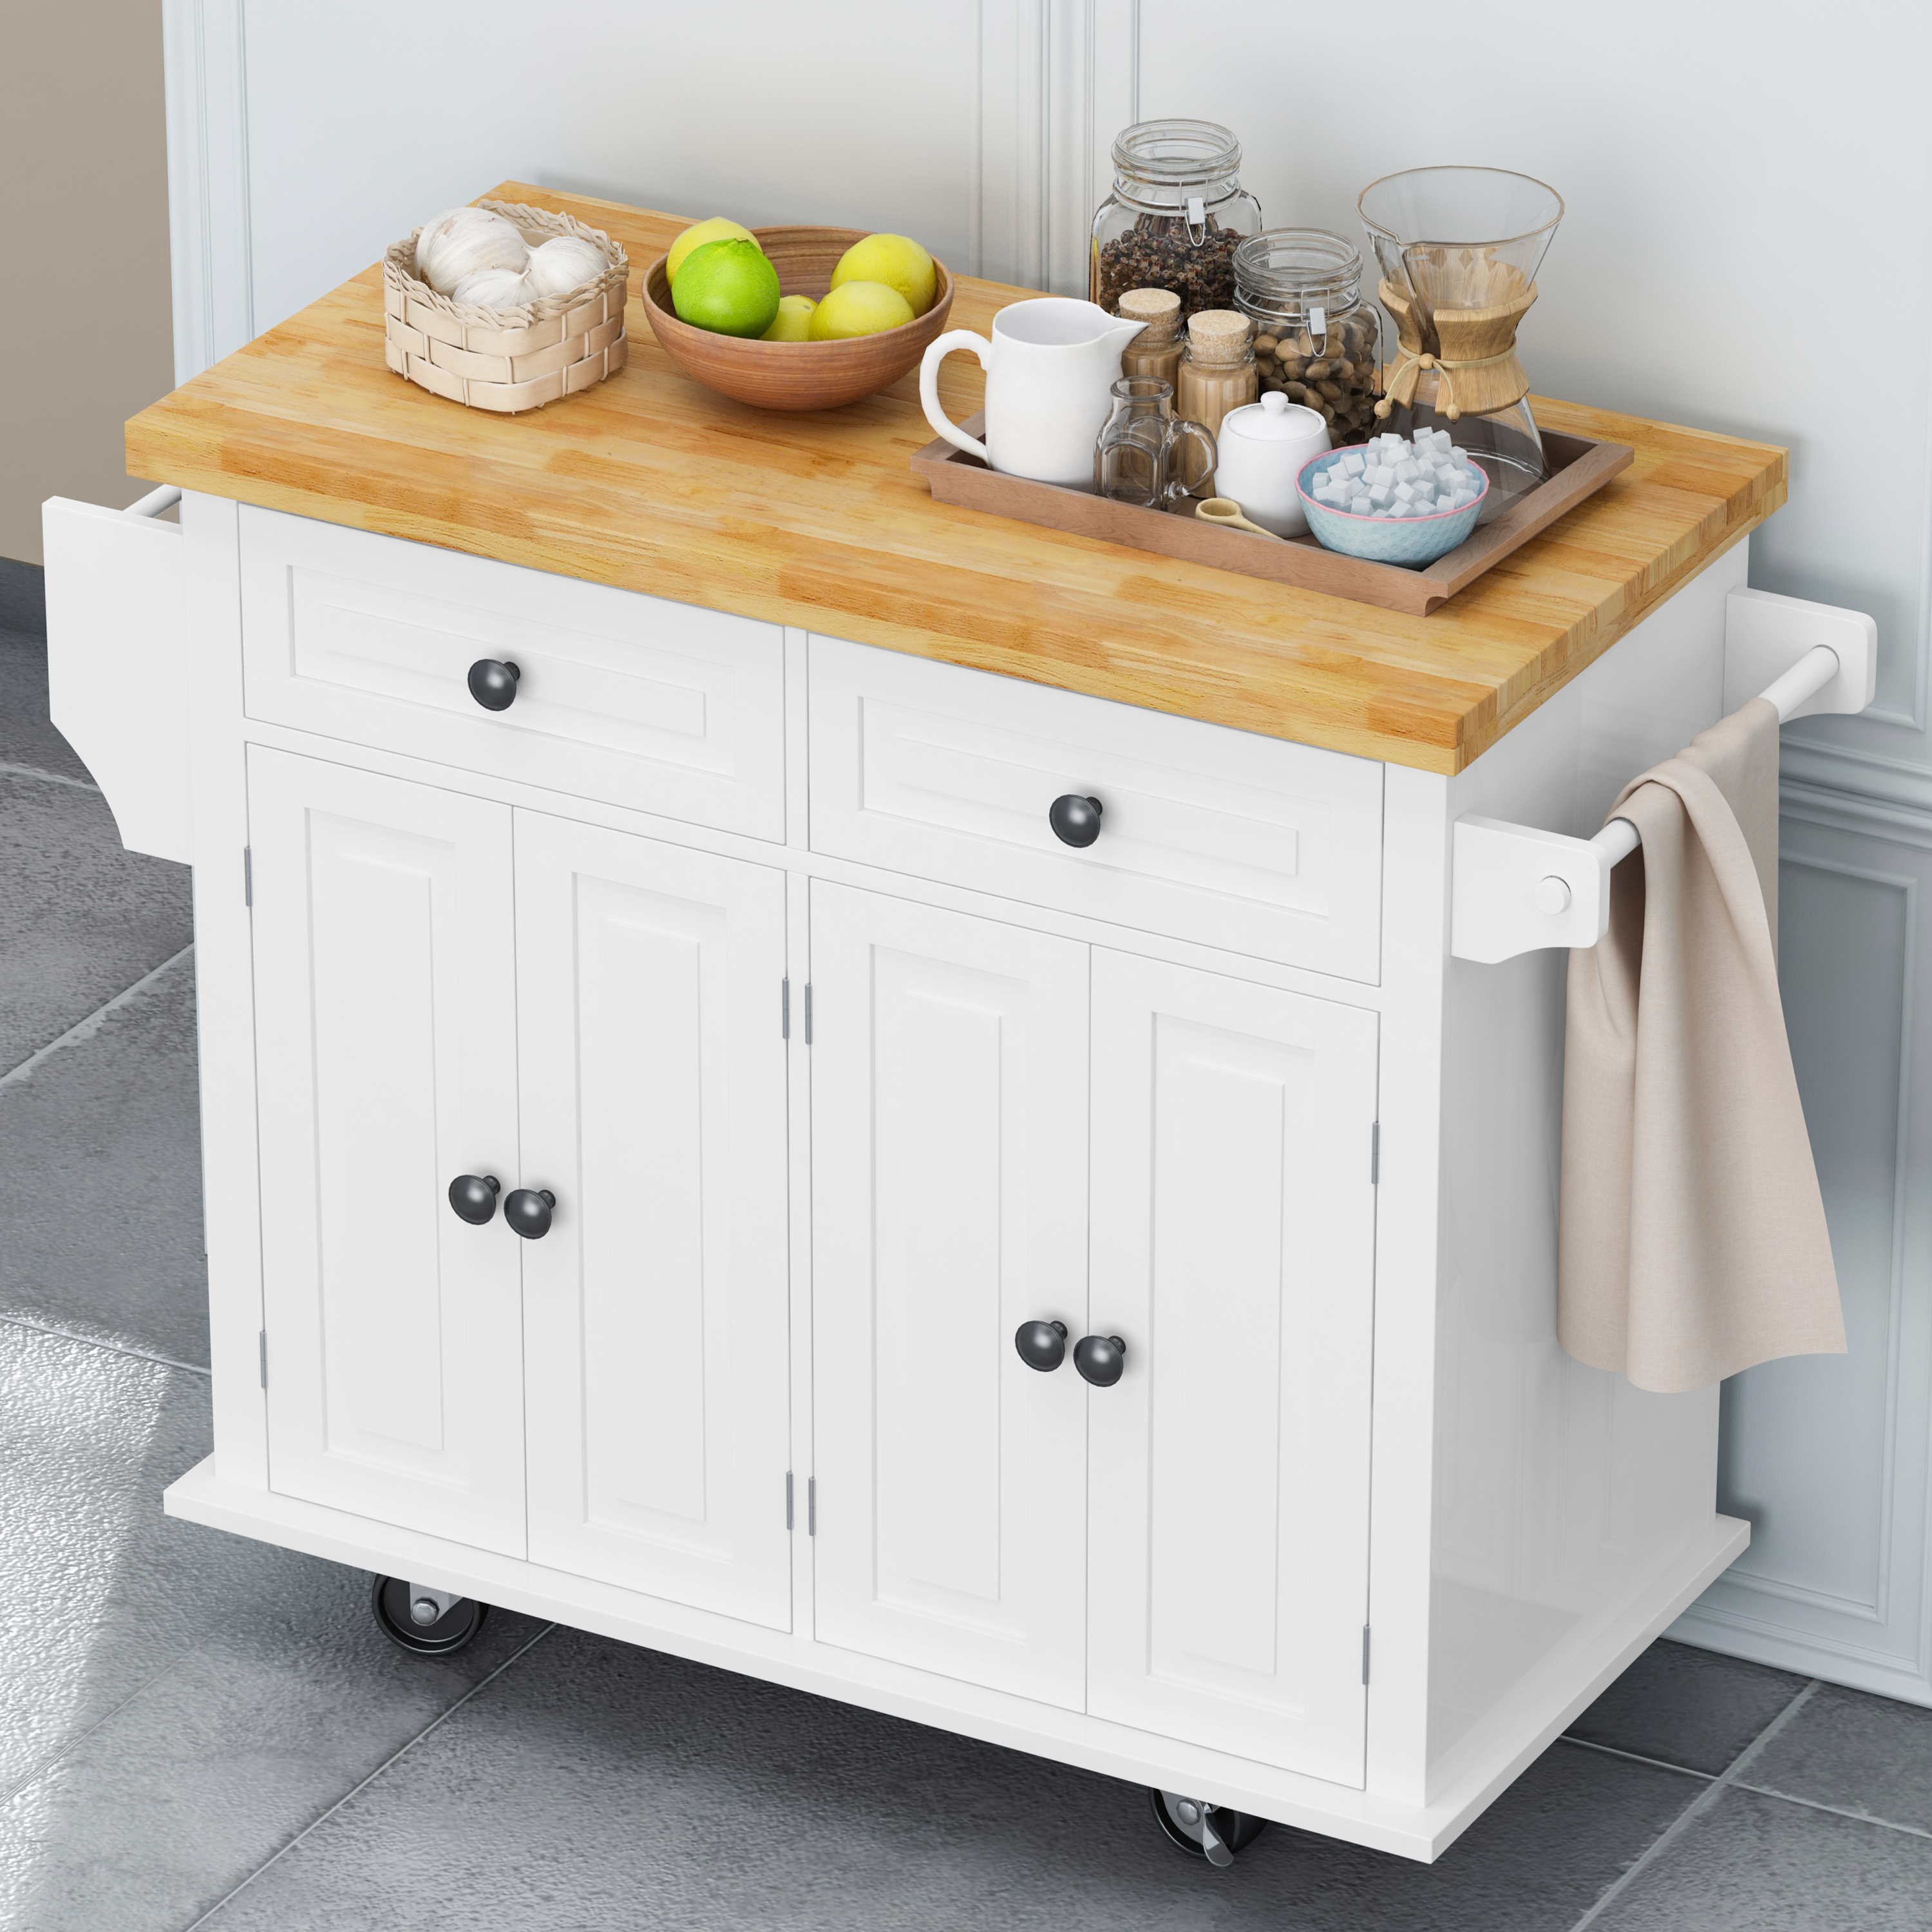 🆓🚛 Kitchen Island Cart With Two Storage Cabinets and Two Locking Wheels, 43.31" Width, 4 Door Cabinet and Two Drawers, Spice Rack, Towel Rack, White